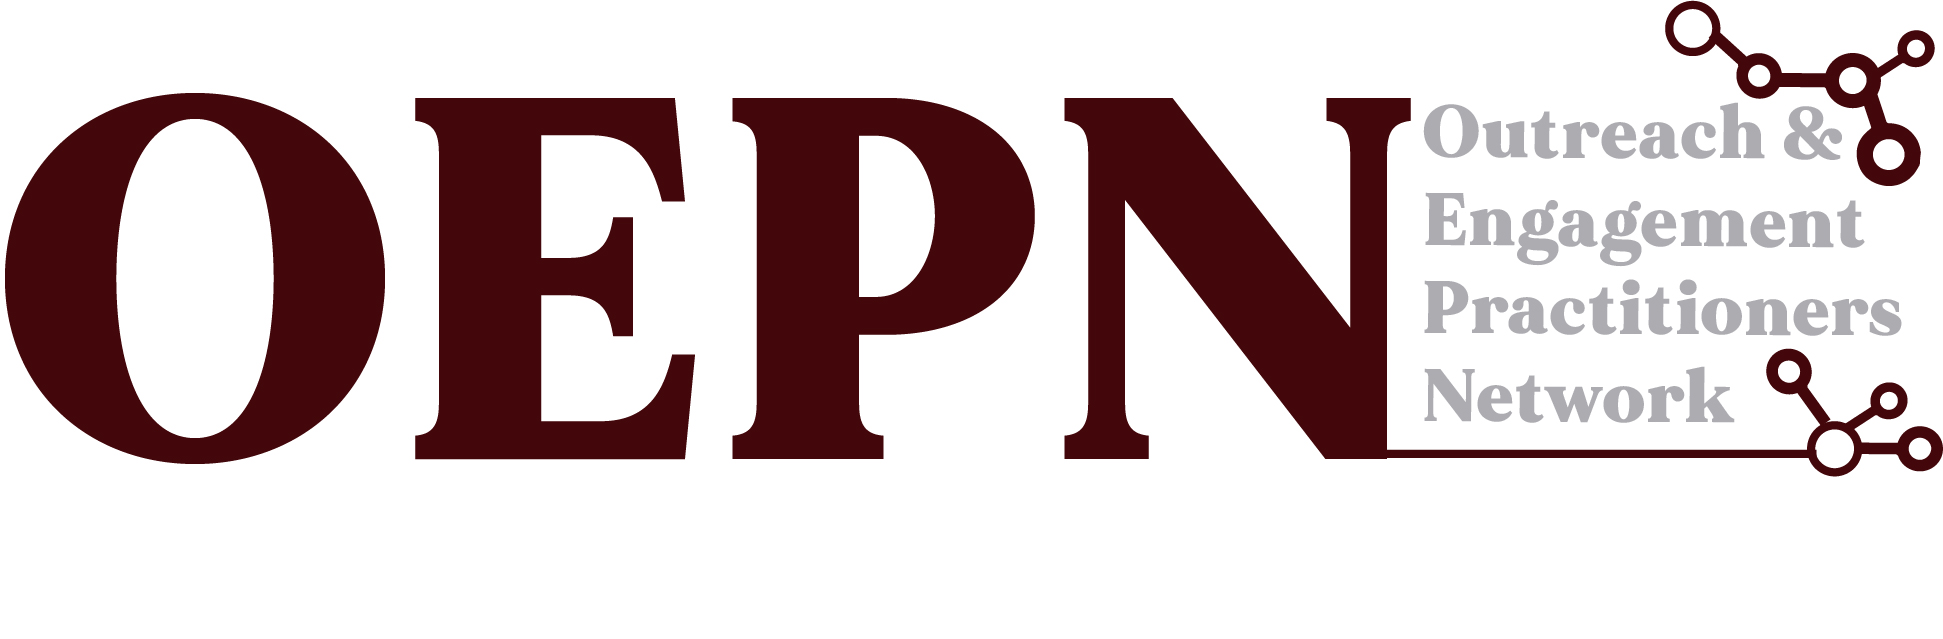 Outreach and Engagement Practitioner Network logo includes OEPN acronym and network node drawing